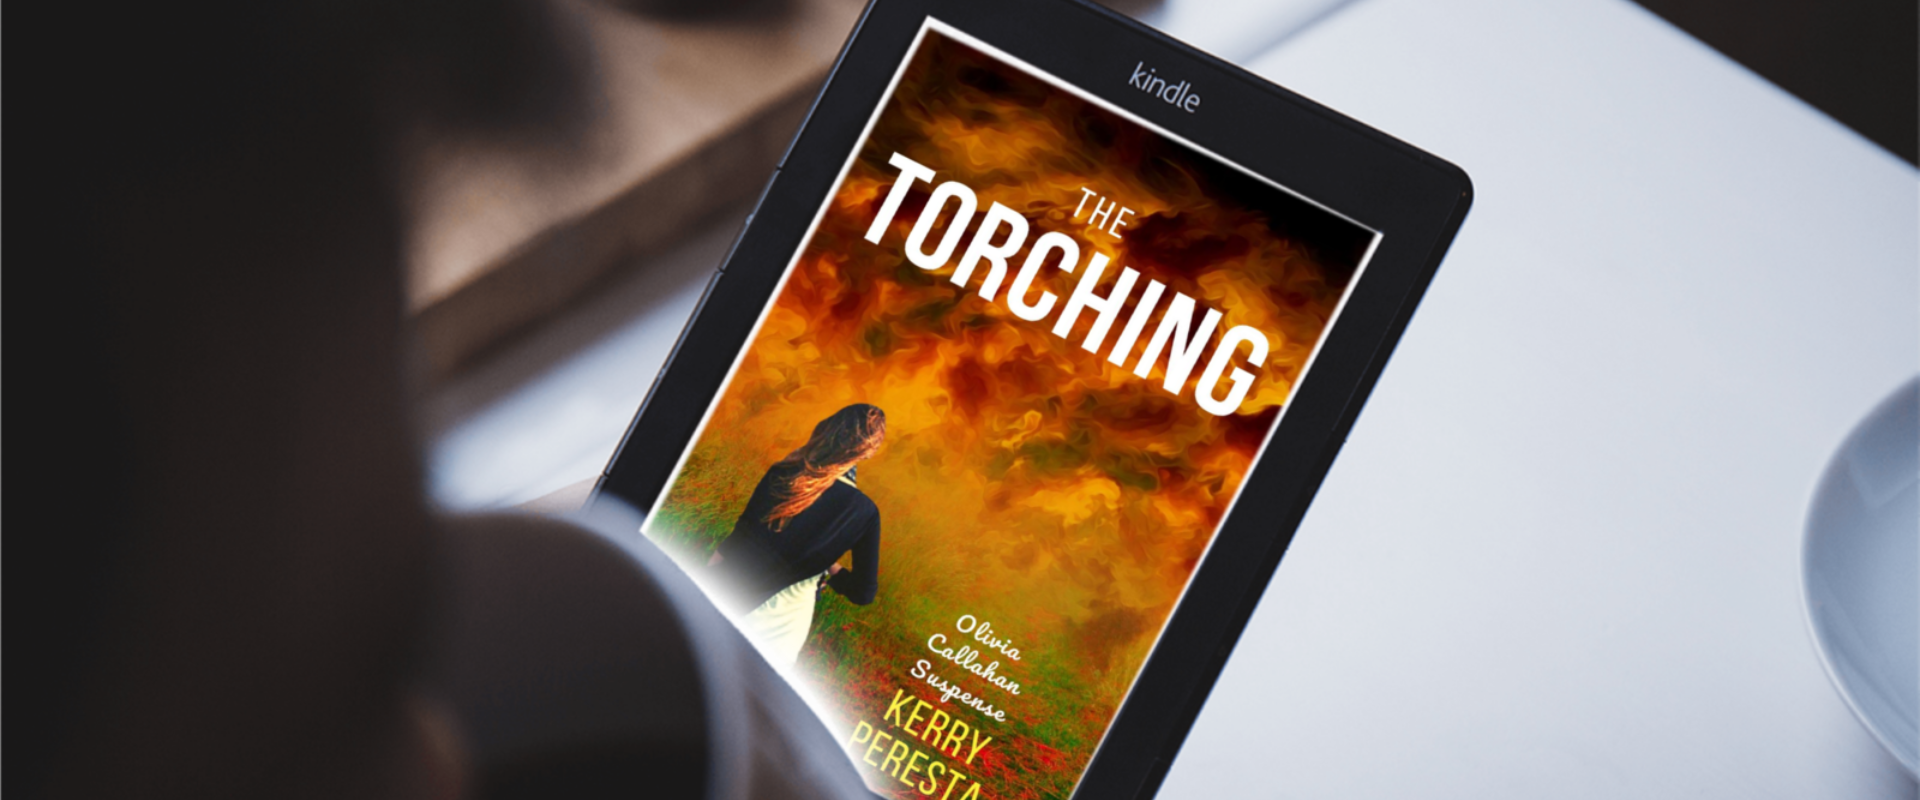 Inside the Author: The Torching